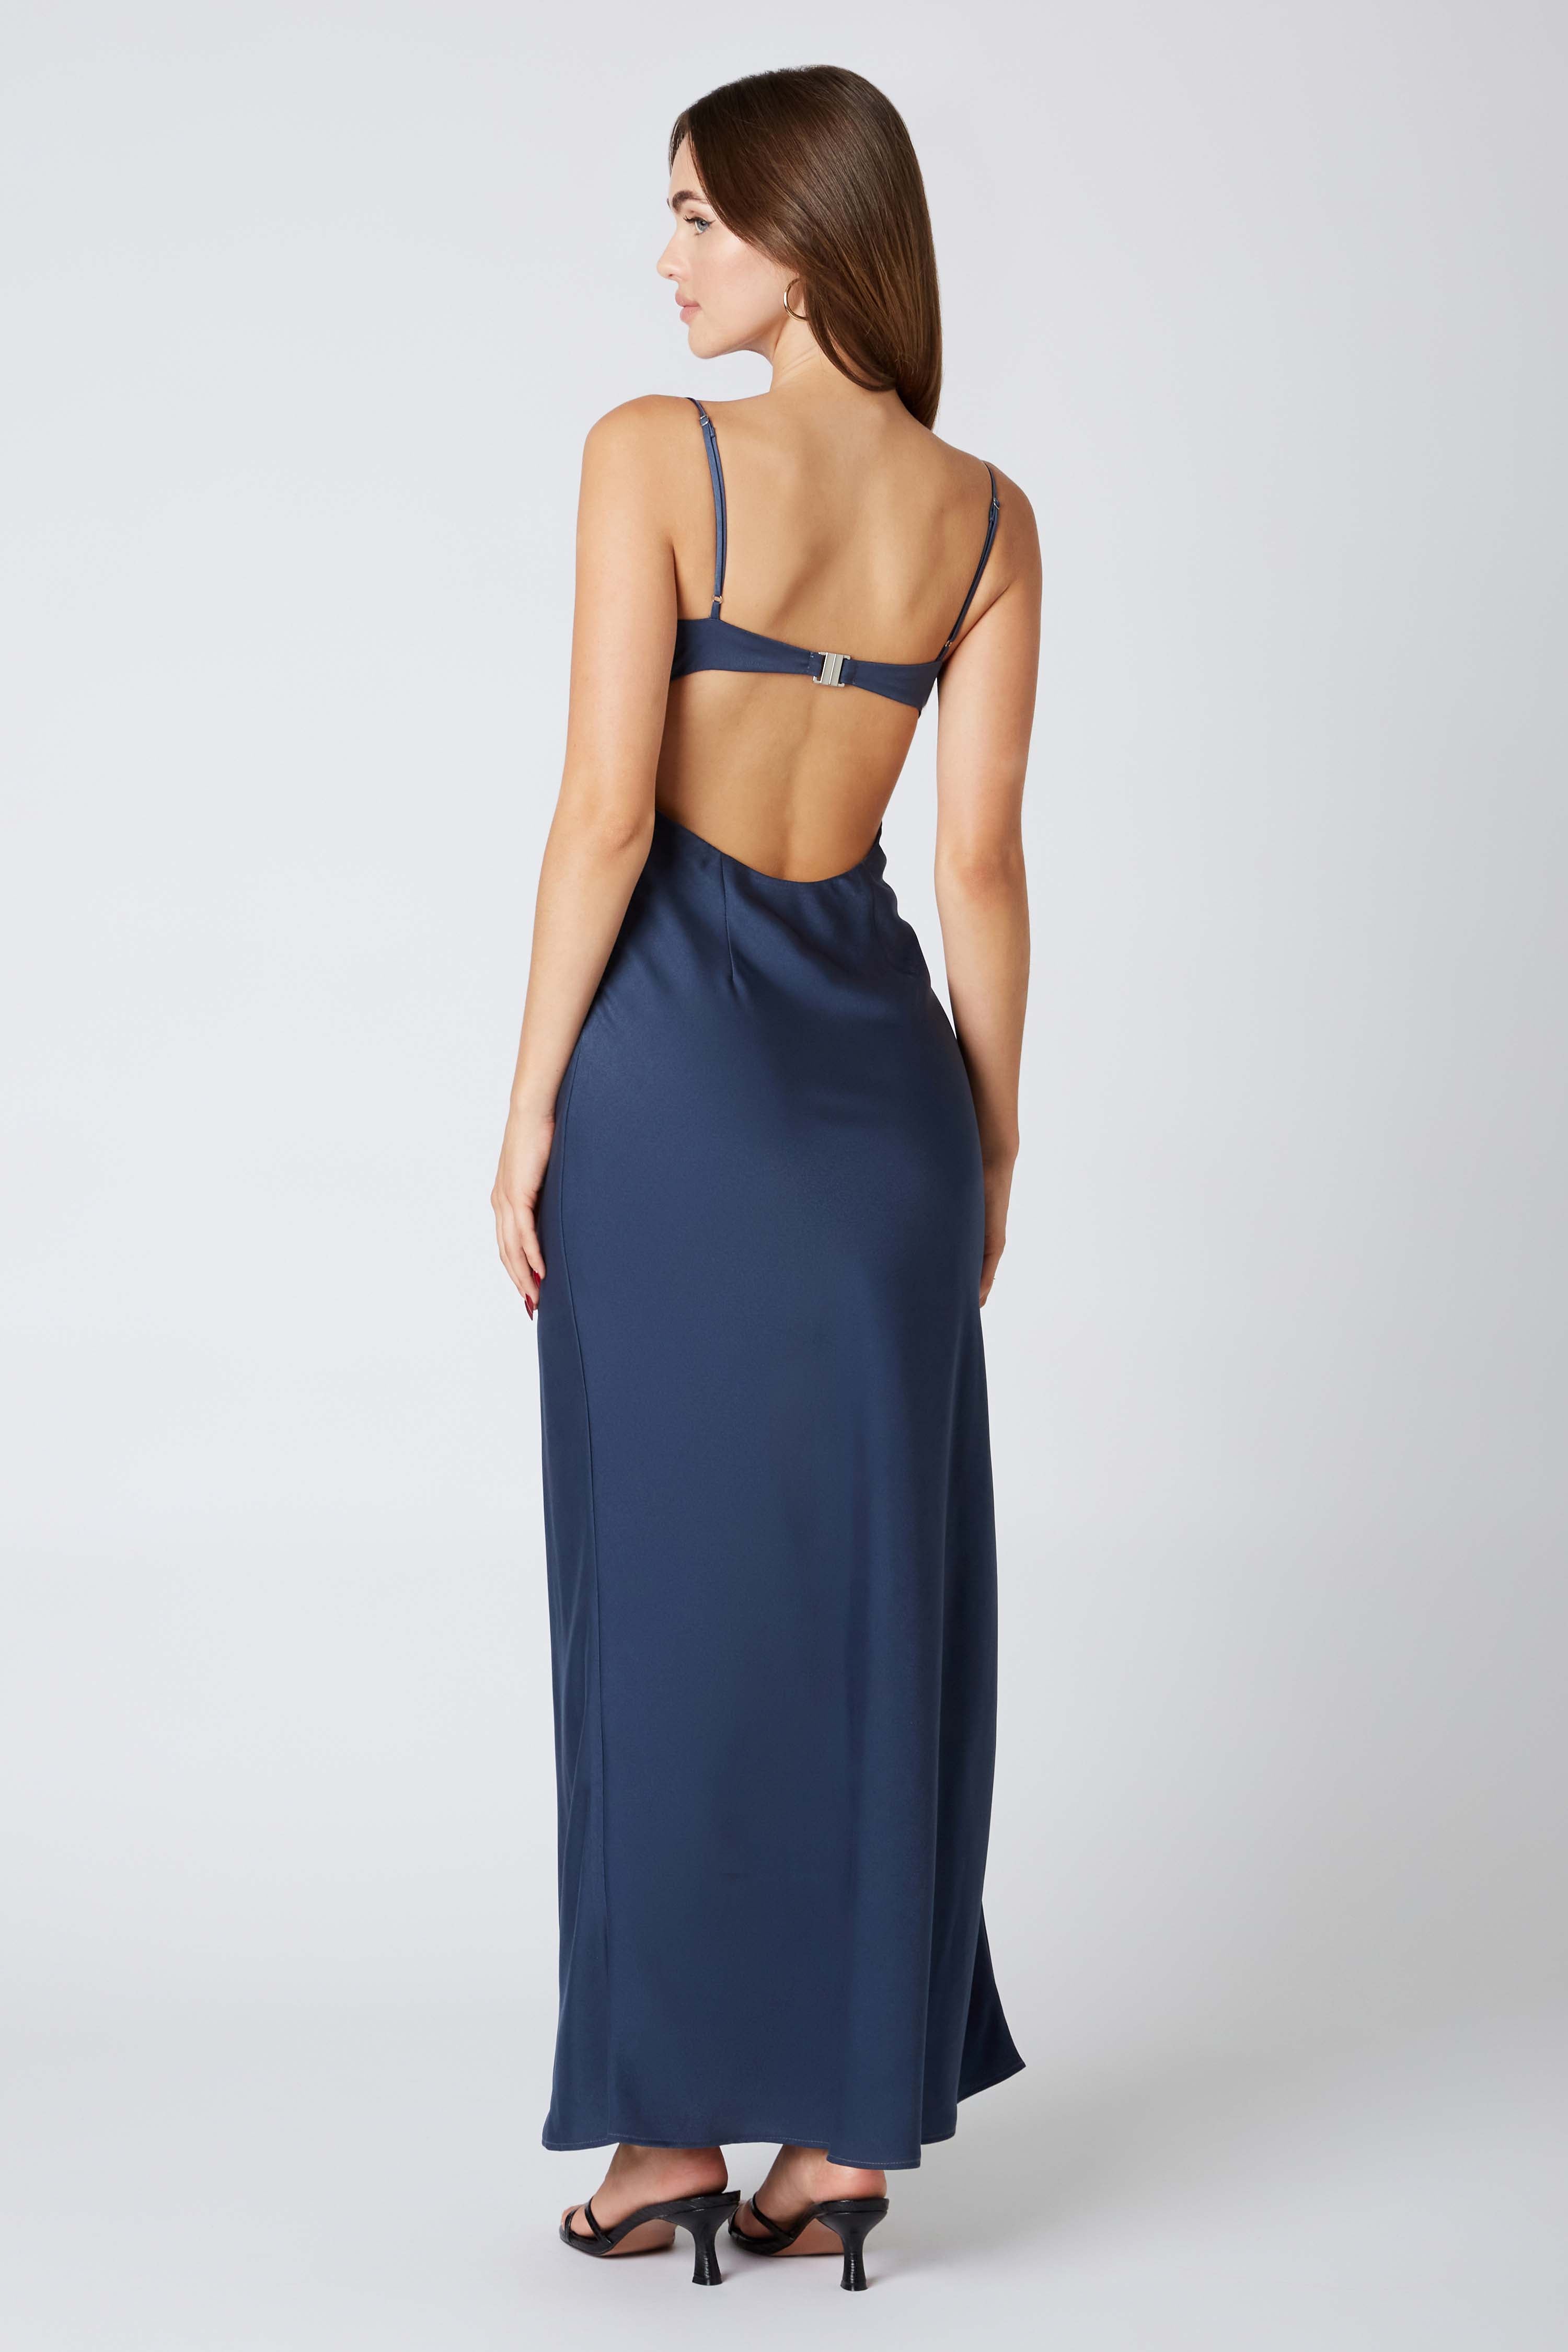 Corset Maxi Dress in Dusk Back View